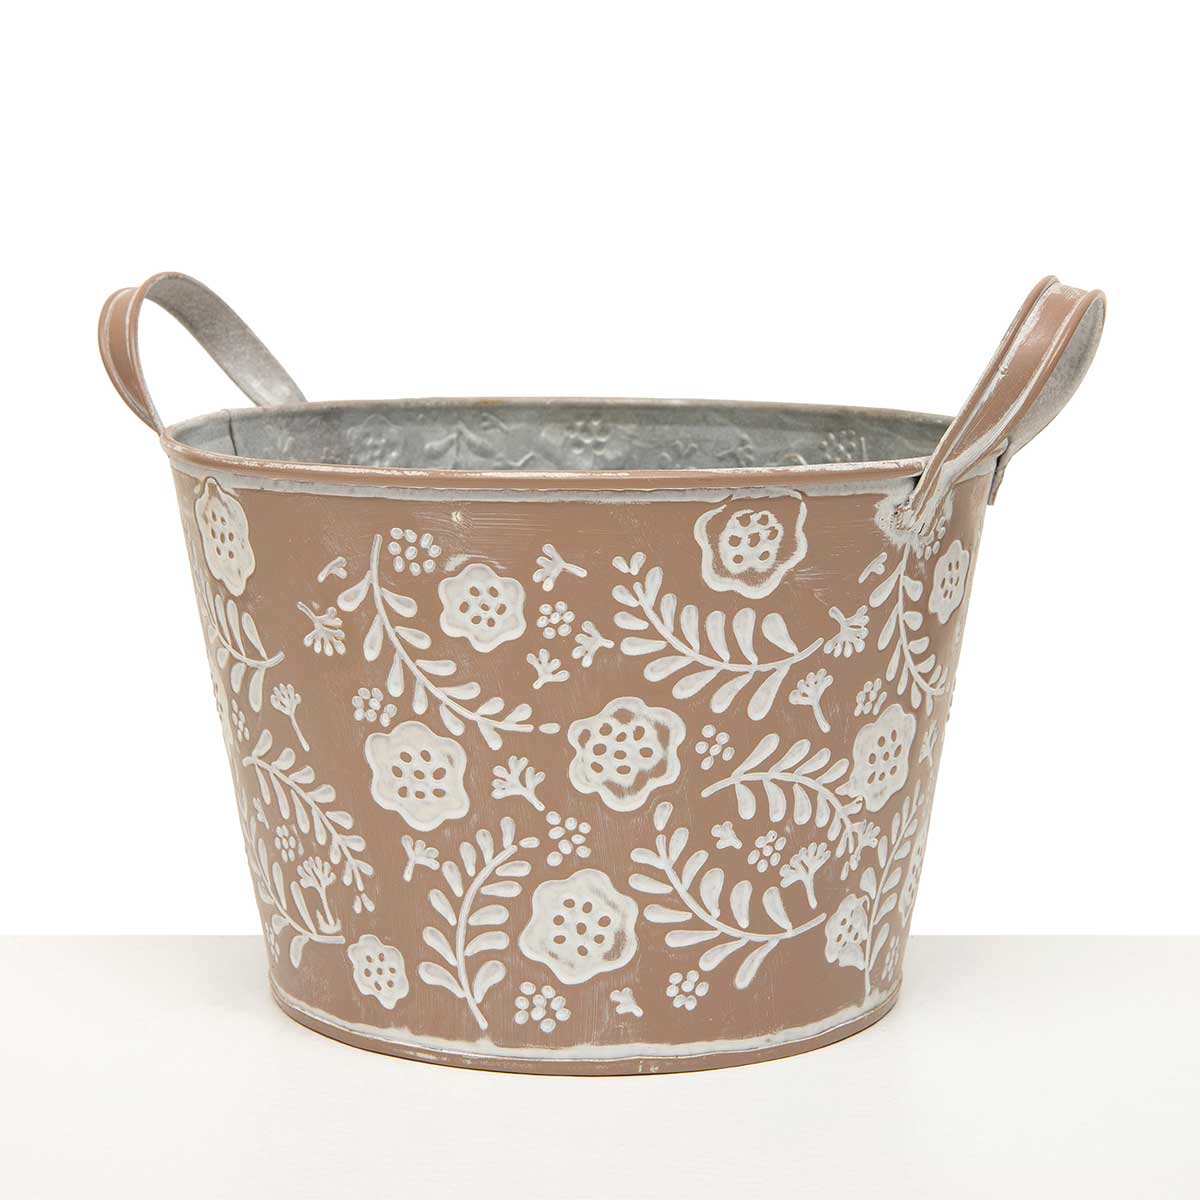 BUCKET FLOWER SHORT 7.5IN X 5IN TAUPE/WHITE METAL WITH HANDLES - Click Image to Close